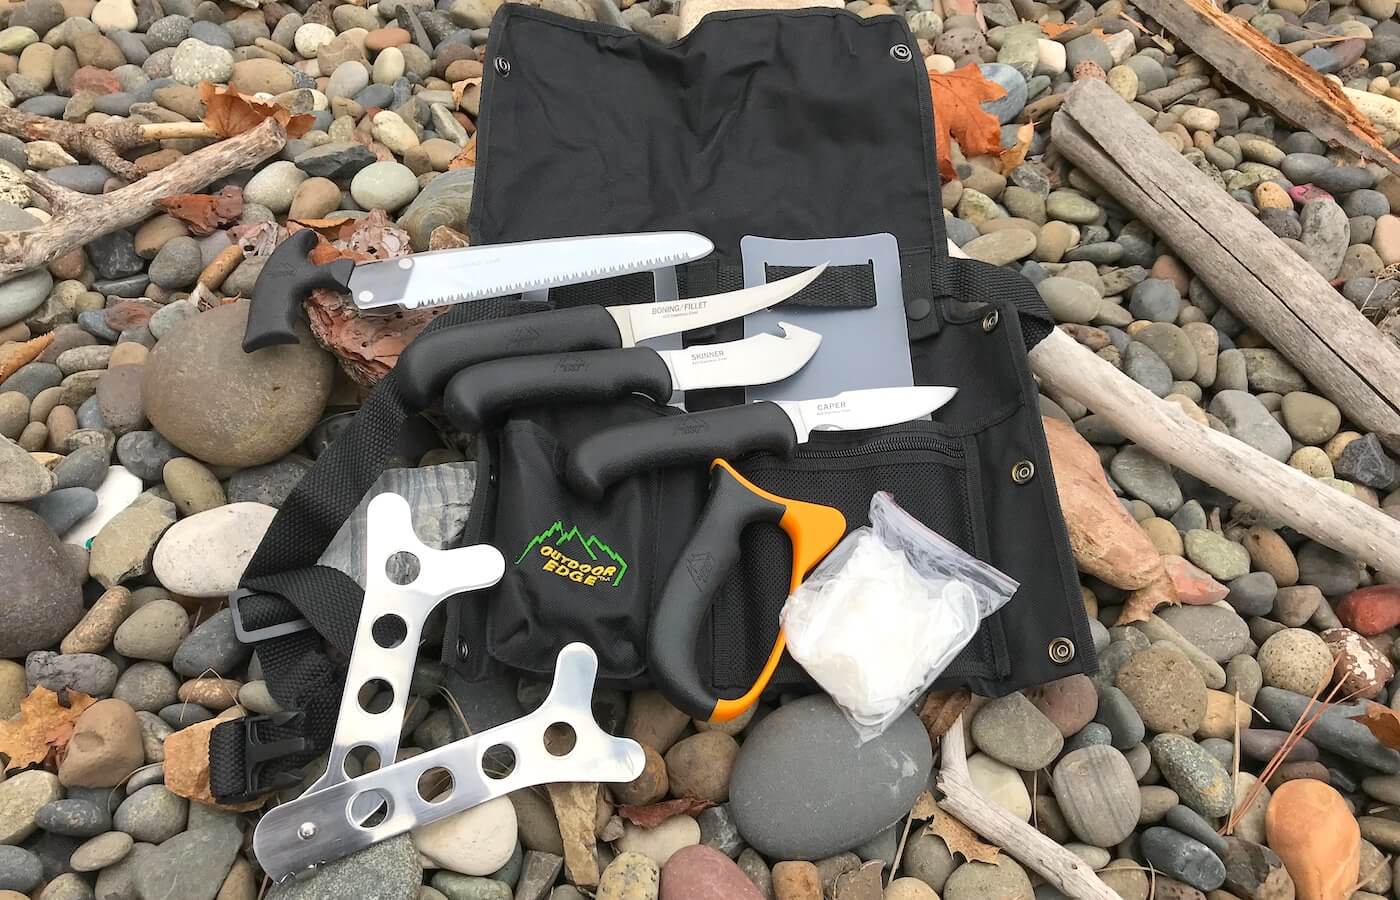 This image shows a photo of the components of the Outdoor Edge ButcherLite.